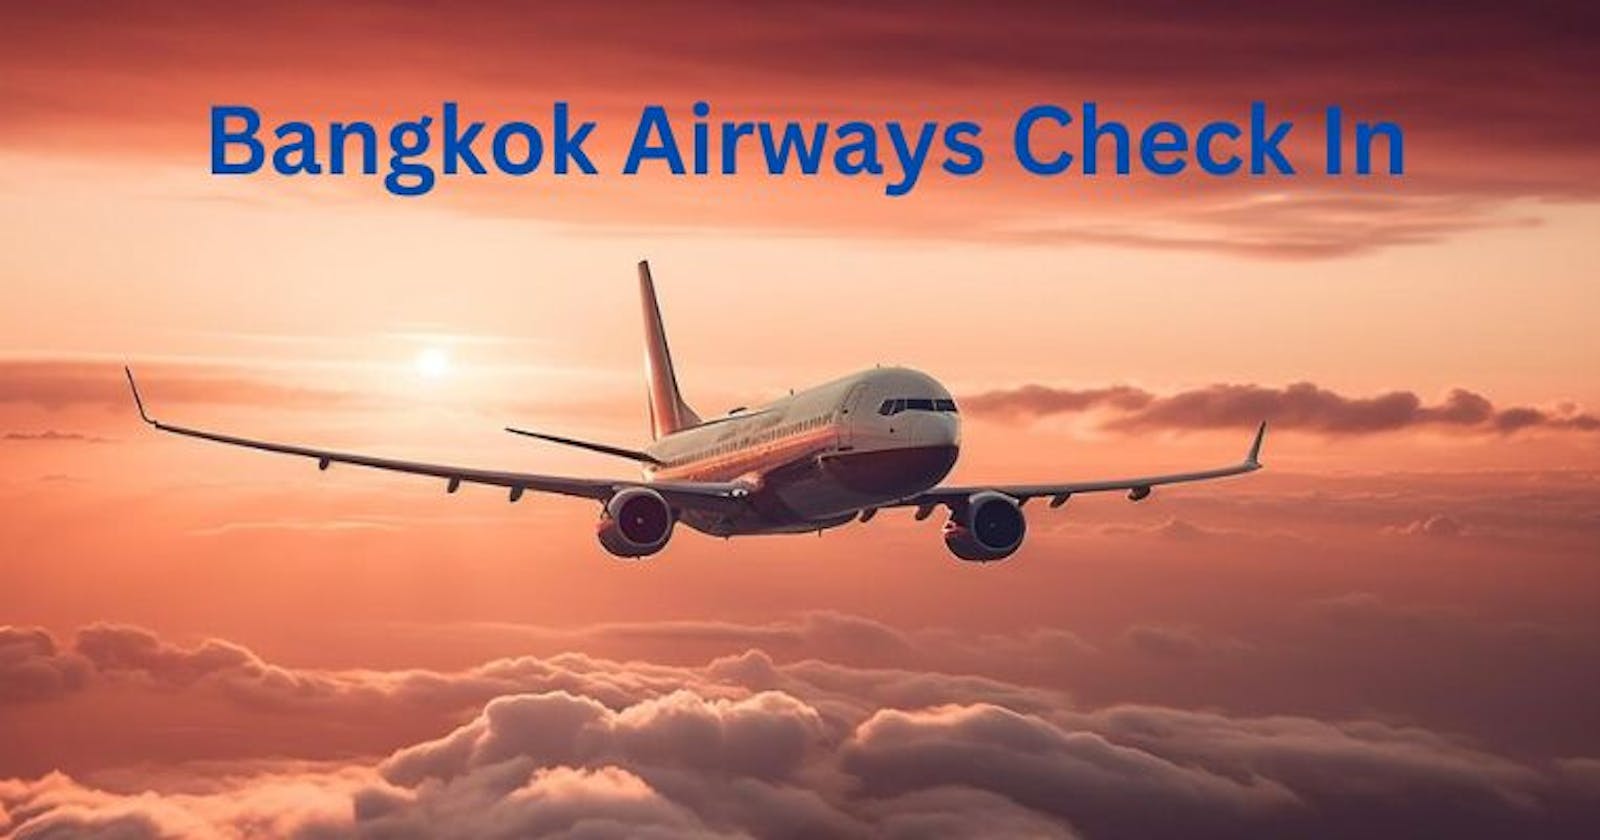 How to Check In for Bangkok Airways Flight?